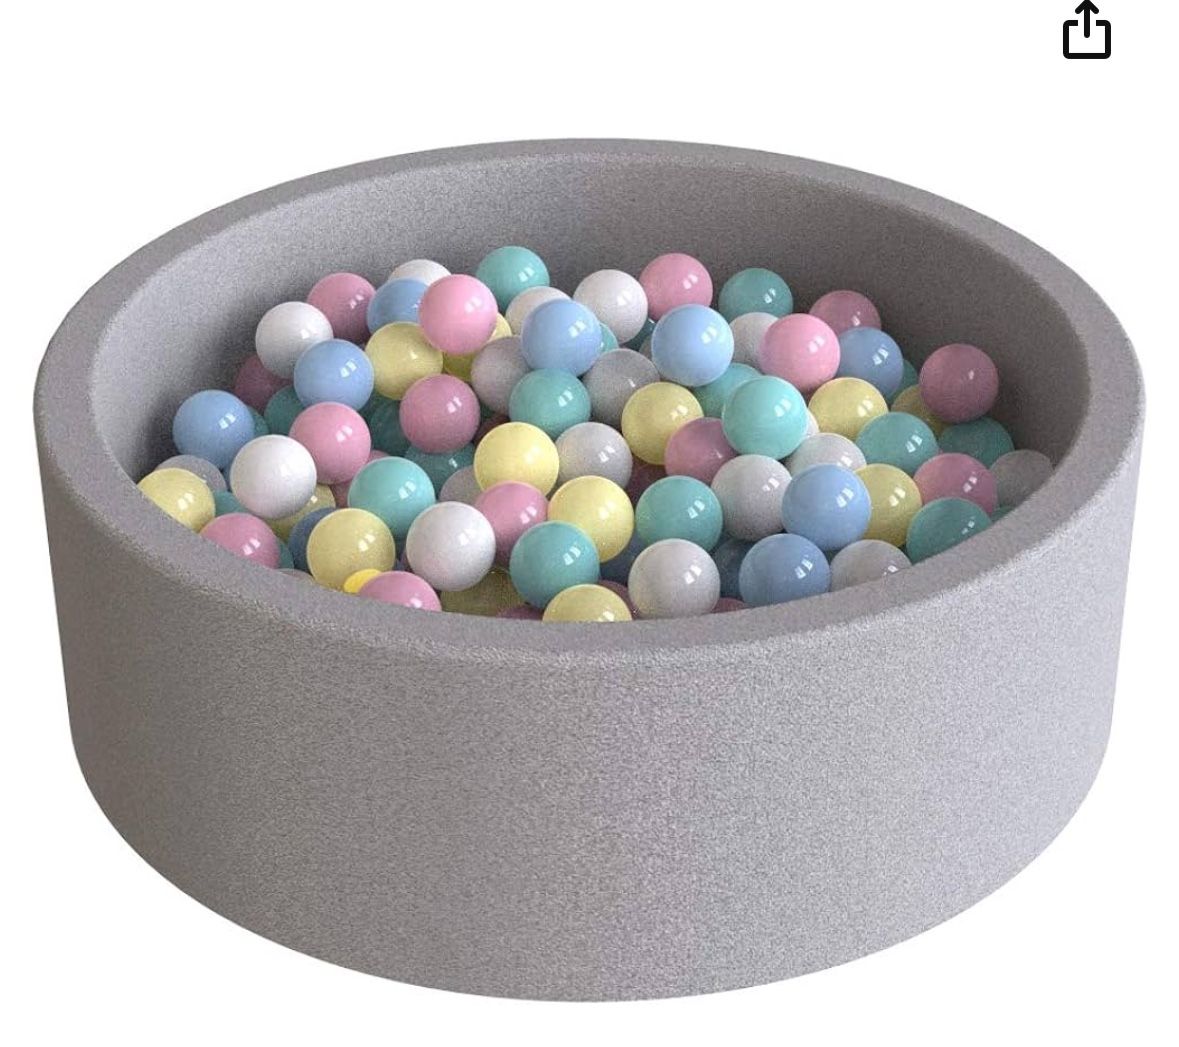 Deluxe Kids Ball-pit With Pink, White And Clear Balls Over 200